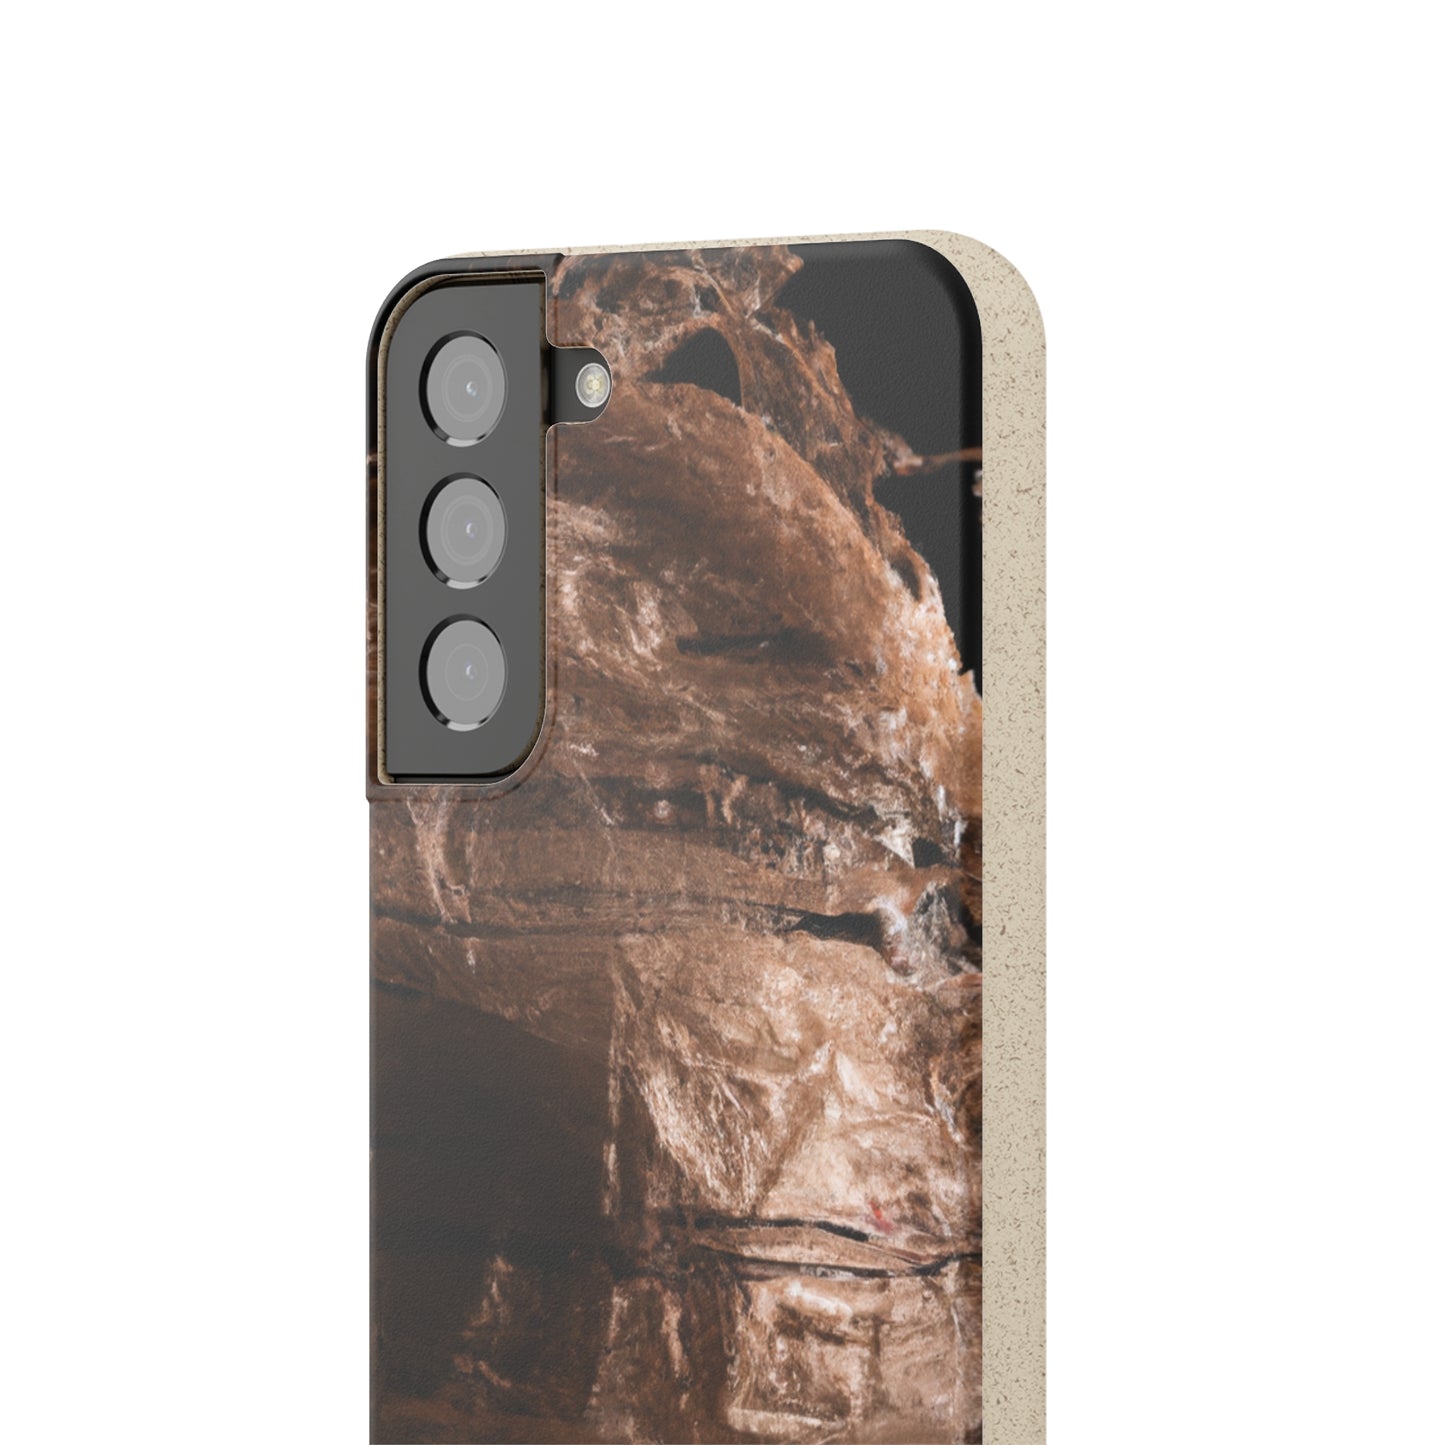 "In Between the Now and Then: Capturing Transitions through Art" - Bam Boo! Lifestyle Eco-friendly Cases